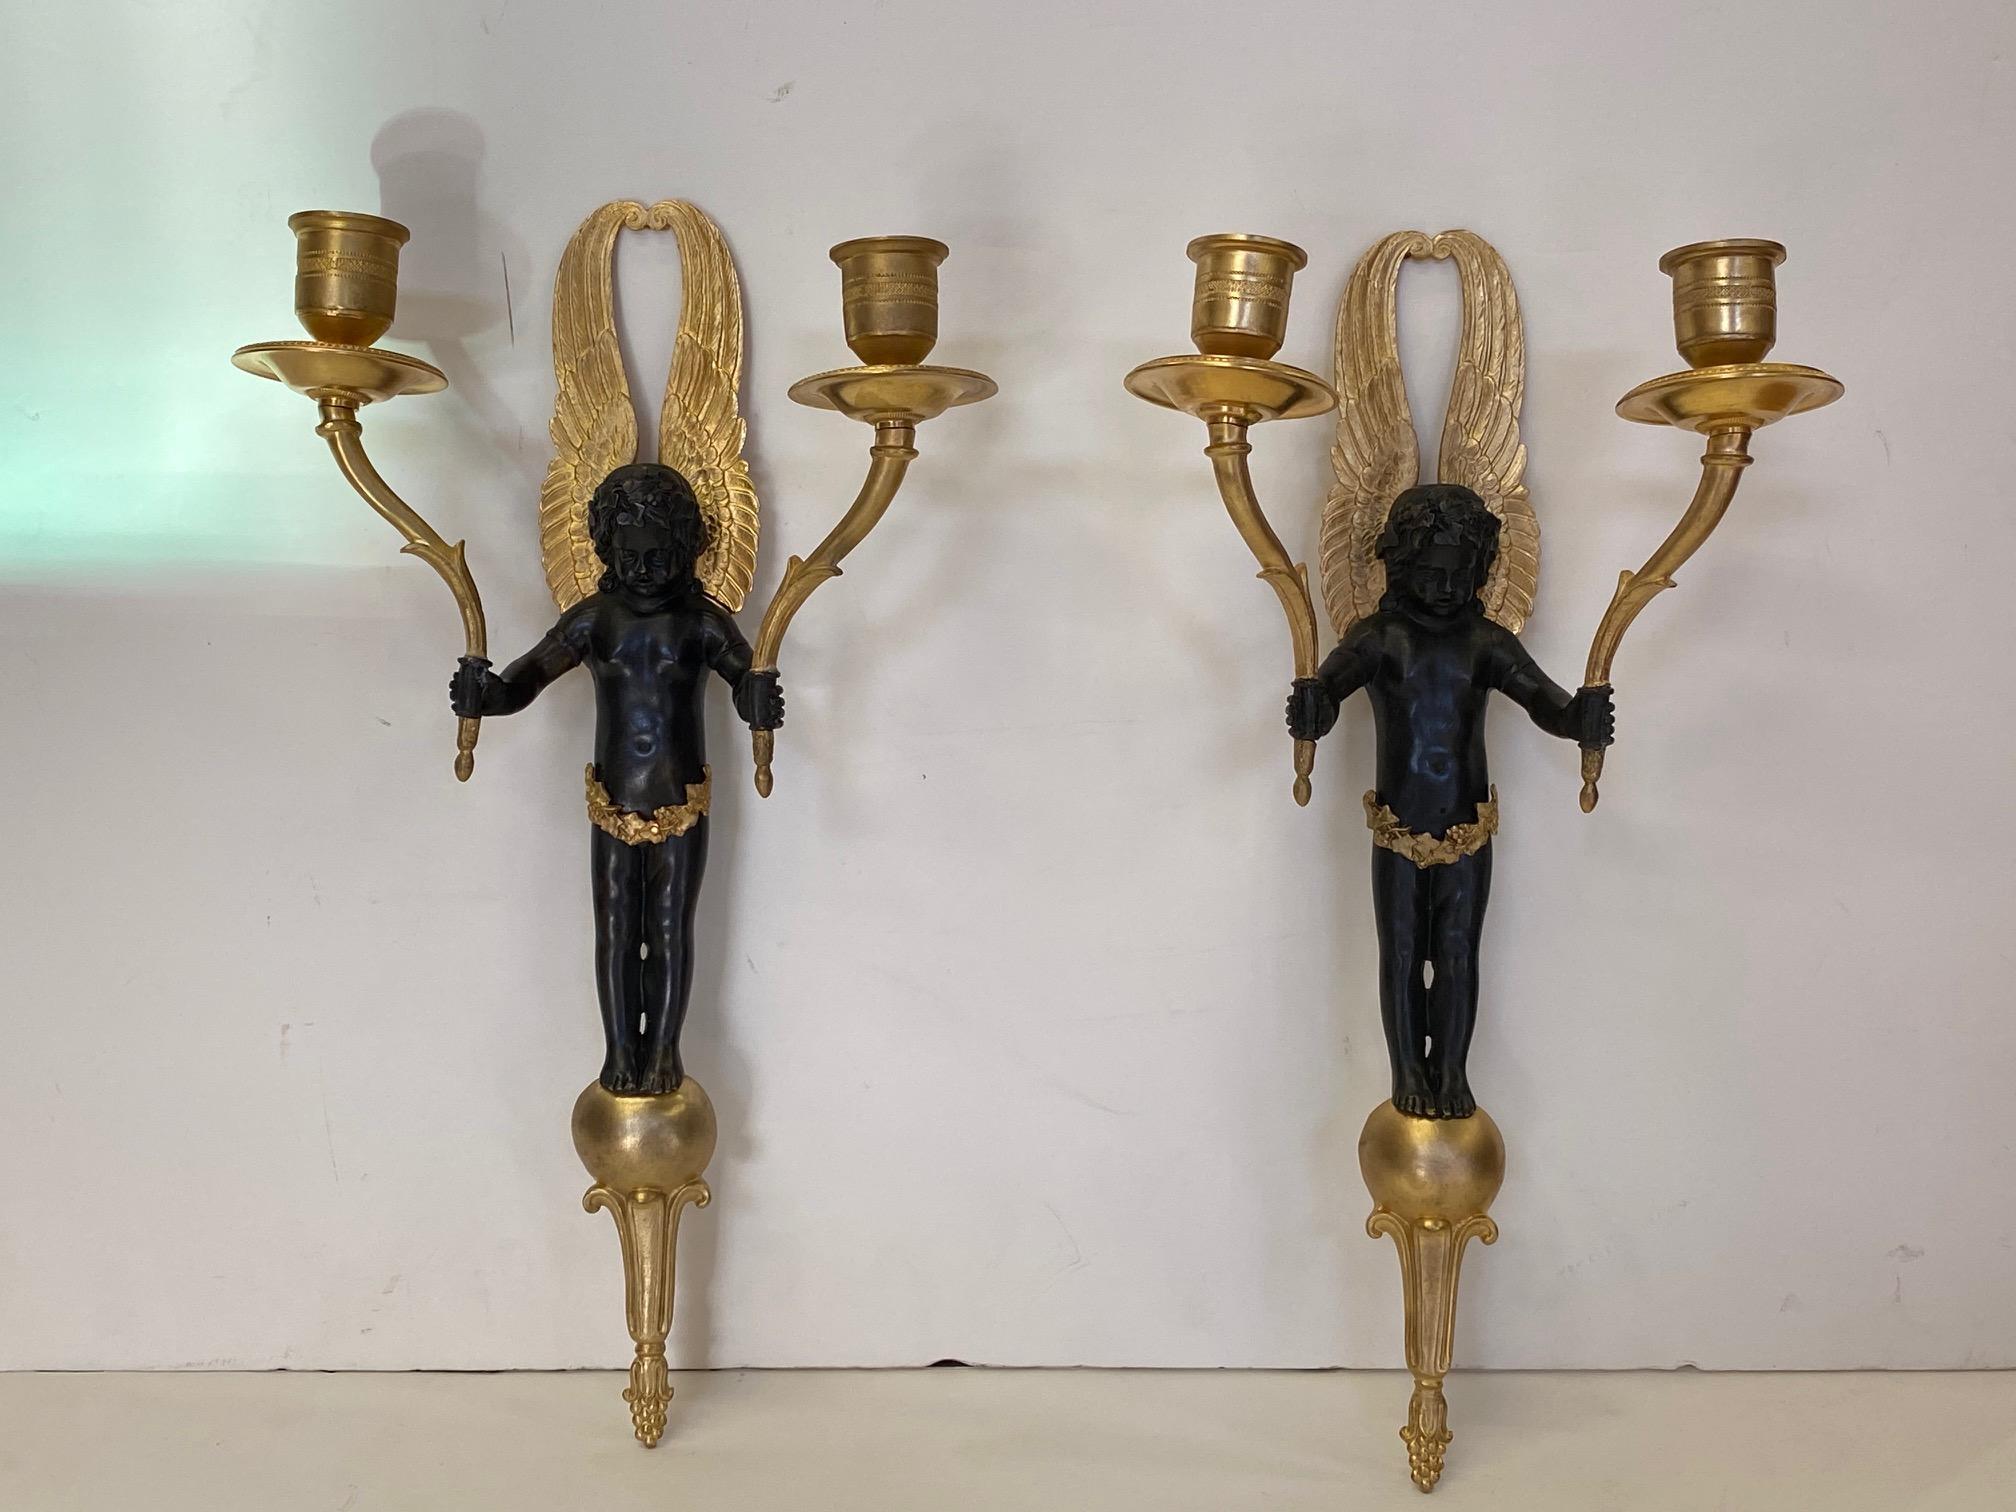 Hollywood Regency Fancy Pair of French Gilt and Patinated Bronze Wall Sconces with Putti